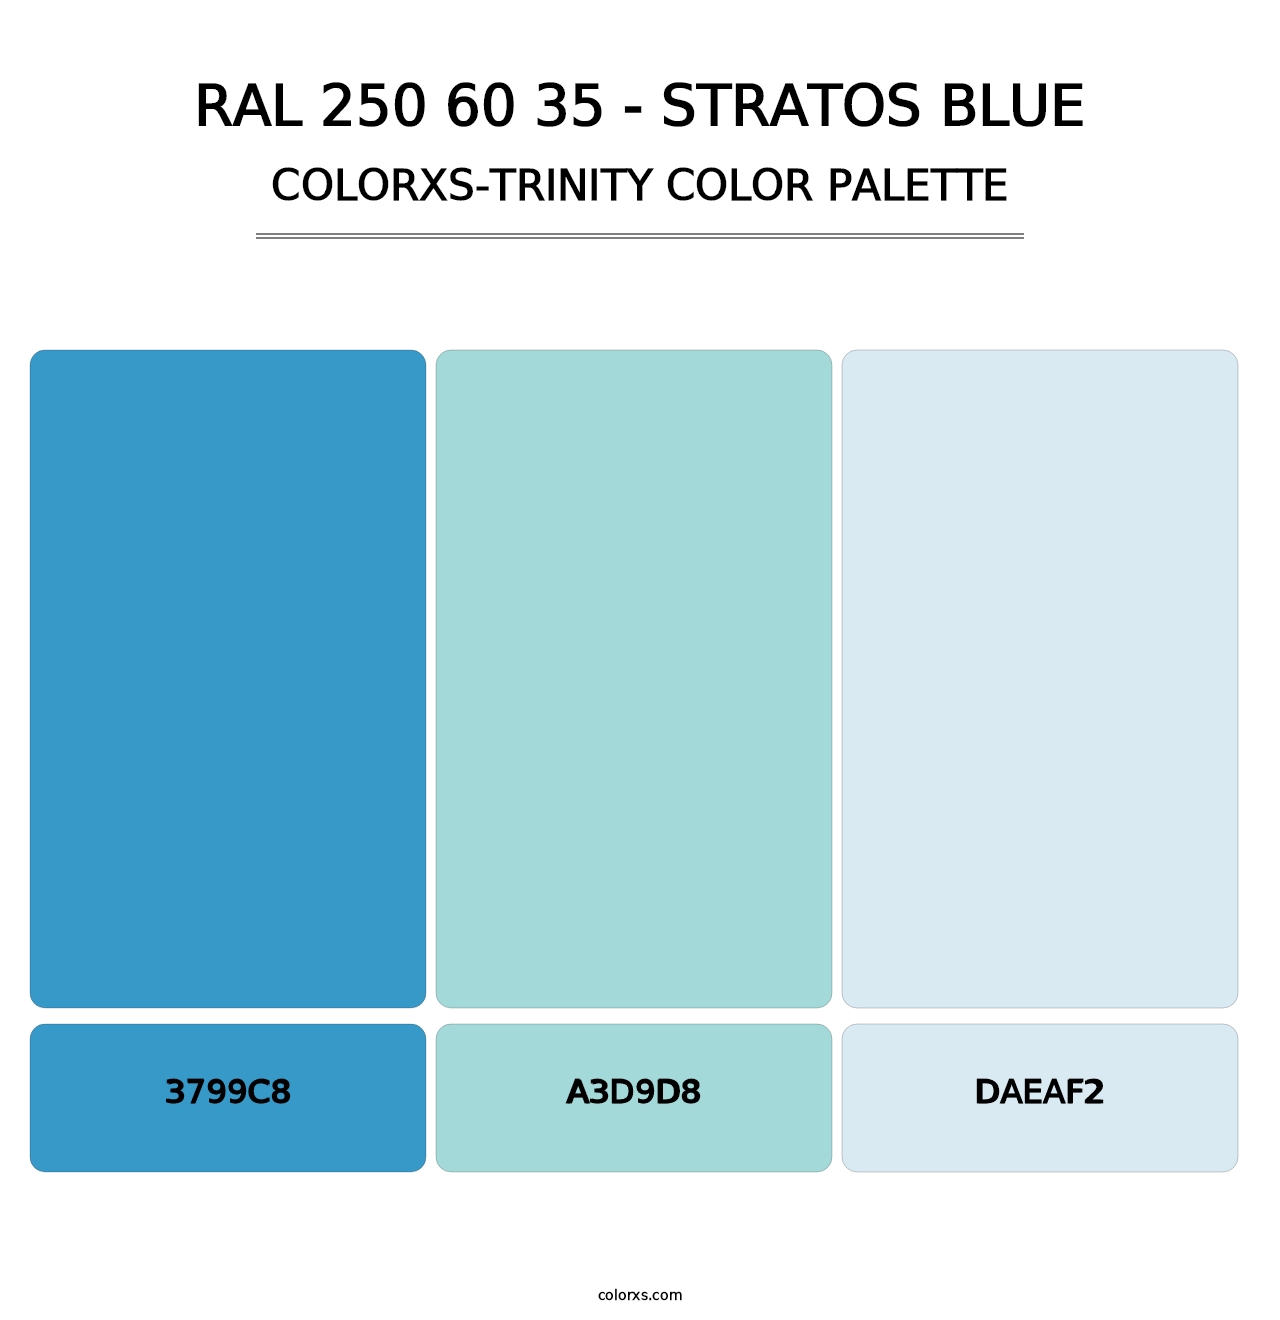 RAL 250 60 35 - Stratos Blue - Colorxs Trinity Palette